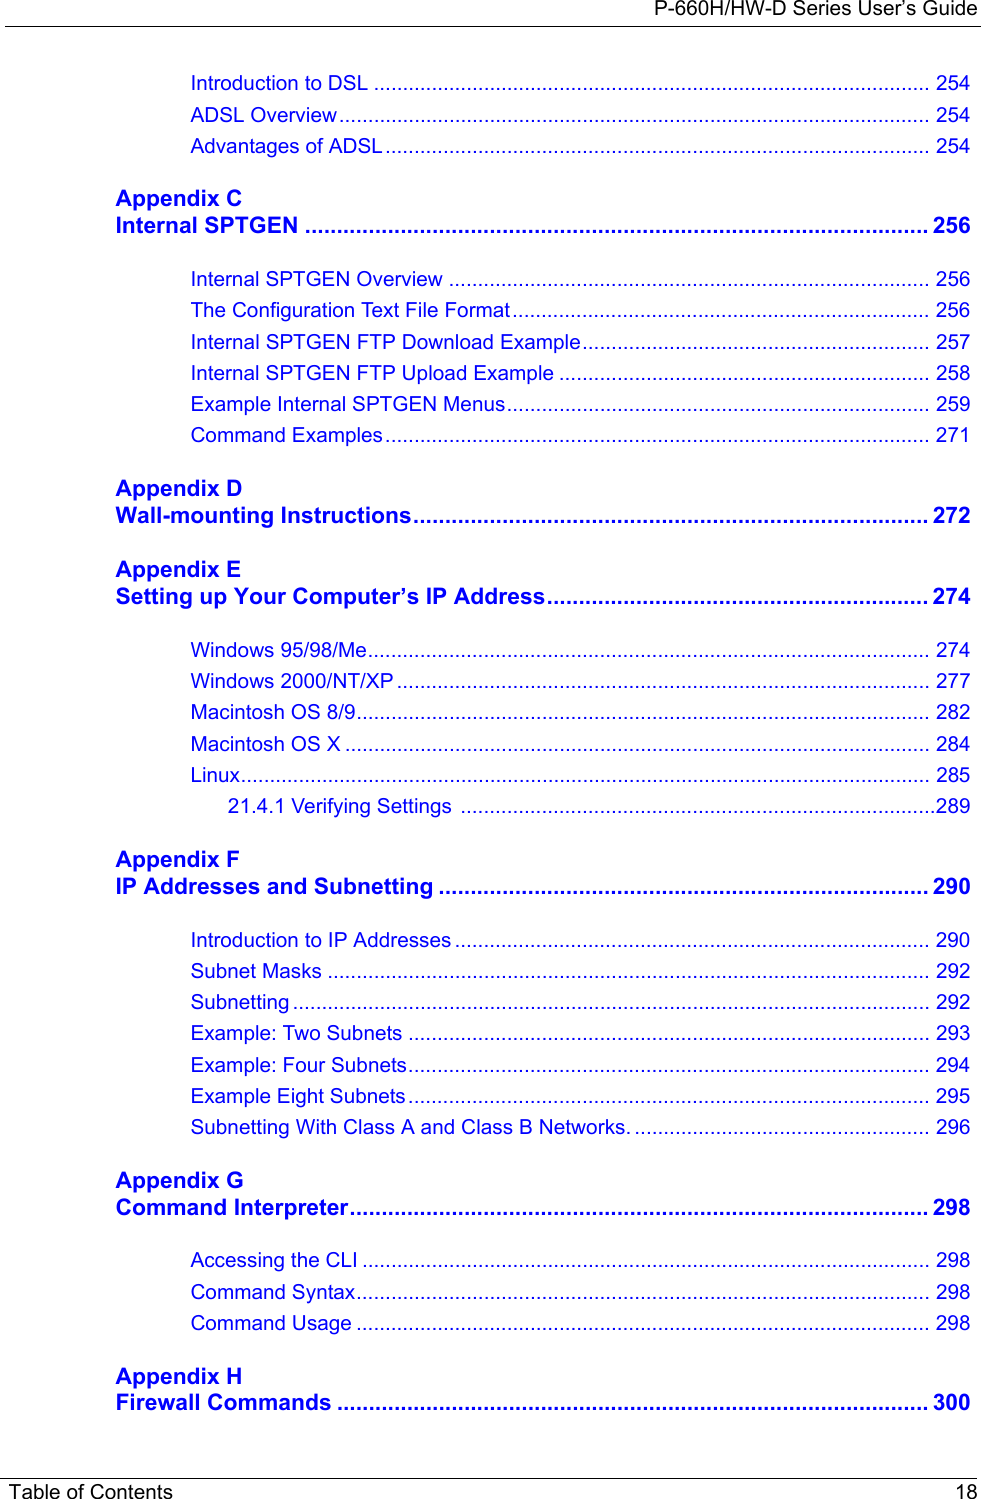 P-660H/HW-D Series User’s GuideTable of Contents 18Introduction to DSL ................................................................................................ 254ADSL Overview...................................................................................................... 254Advantages of ADSL.............................................................................................. 254Appendix CInternal SPTGEN .................................................................................................. 256Internal SPTGEN Overview ................................................................................... 256The Configuration Text File Format........................................................................ 256Internal SPTGEN FTP Download Example............................................................ 257Internal SPTGEN FTP Upload Example ................................................................ 258Example Internal SPTGEN Menus......................................................................... 259Command Examples.............................................................................................. 271Appendix DWall-mounting Instructions................................................................................. 272Appendix ESetting up Your Computer’s IP Address............................................................ 274Windows 95/98/Me................................................................................................. 274Windows 2000/NT/XP ............................................................................................ 277Macintosh OS 8/9................................................................................................... 282Macintosh OS X ..................................................................................................... 284Linux....................................................................................................................... 28521.4.1 Verifying Settings  ..................................................................................289Appendix FIP Addresses and Subnetting ............................................................................. 290Introduction to IP Addresses .................................................................................. 290Subnet Masks ........................................................................................................ 292Subnetting .............................................................................................................. 292Example: Two Subnets .......................................................................................... 293Example: Four Subnets.......................................................................................... 294Example Eight Subnets.......................................................................................... 295Subnetting With Class A and Class B Networks. ................................................... 296Appendix GCommand Interpreter........................................................................................... 298Accessing the CLI .................................................................................................. 298Command Syntax................................................................................................... 298Command Usage ................................................................................................... 298Appendix HFirewall Commands ............................................................................................. 300